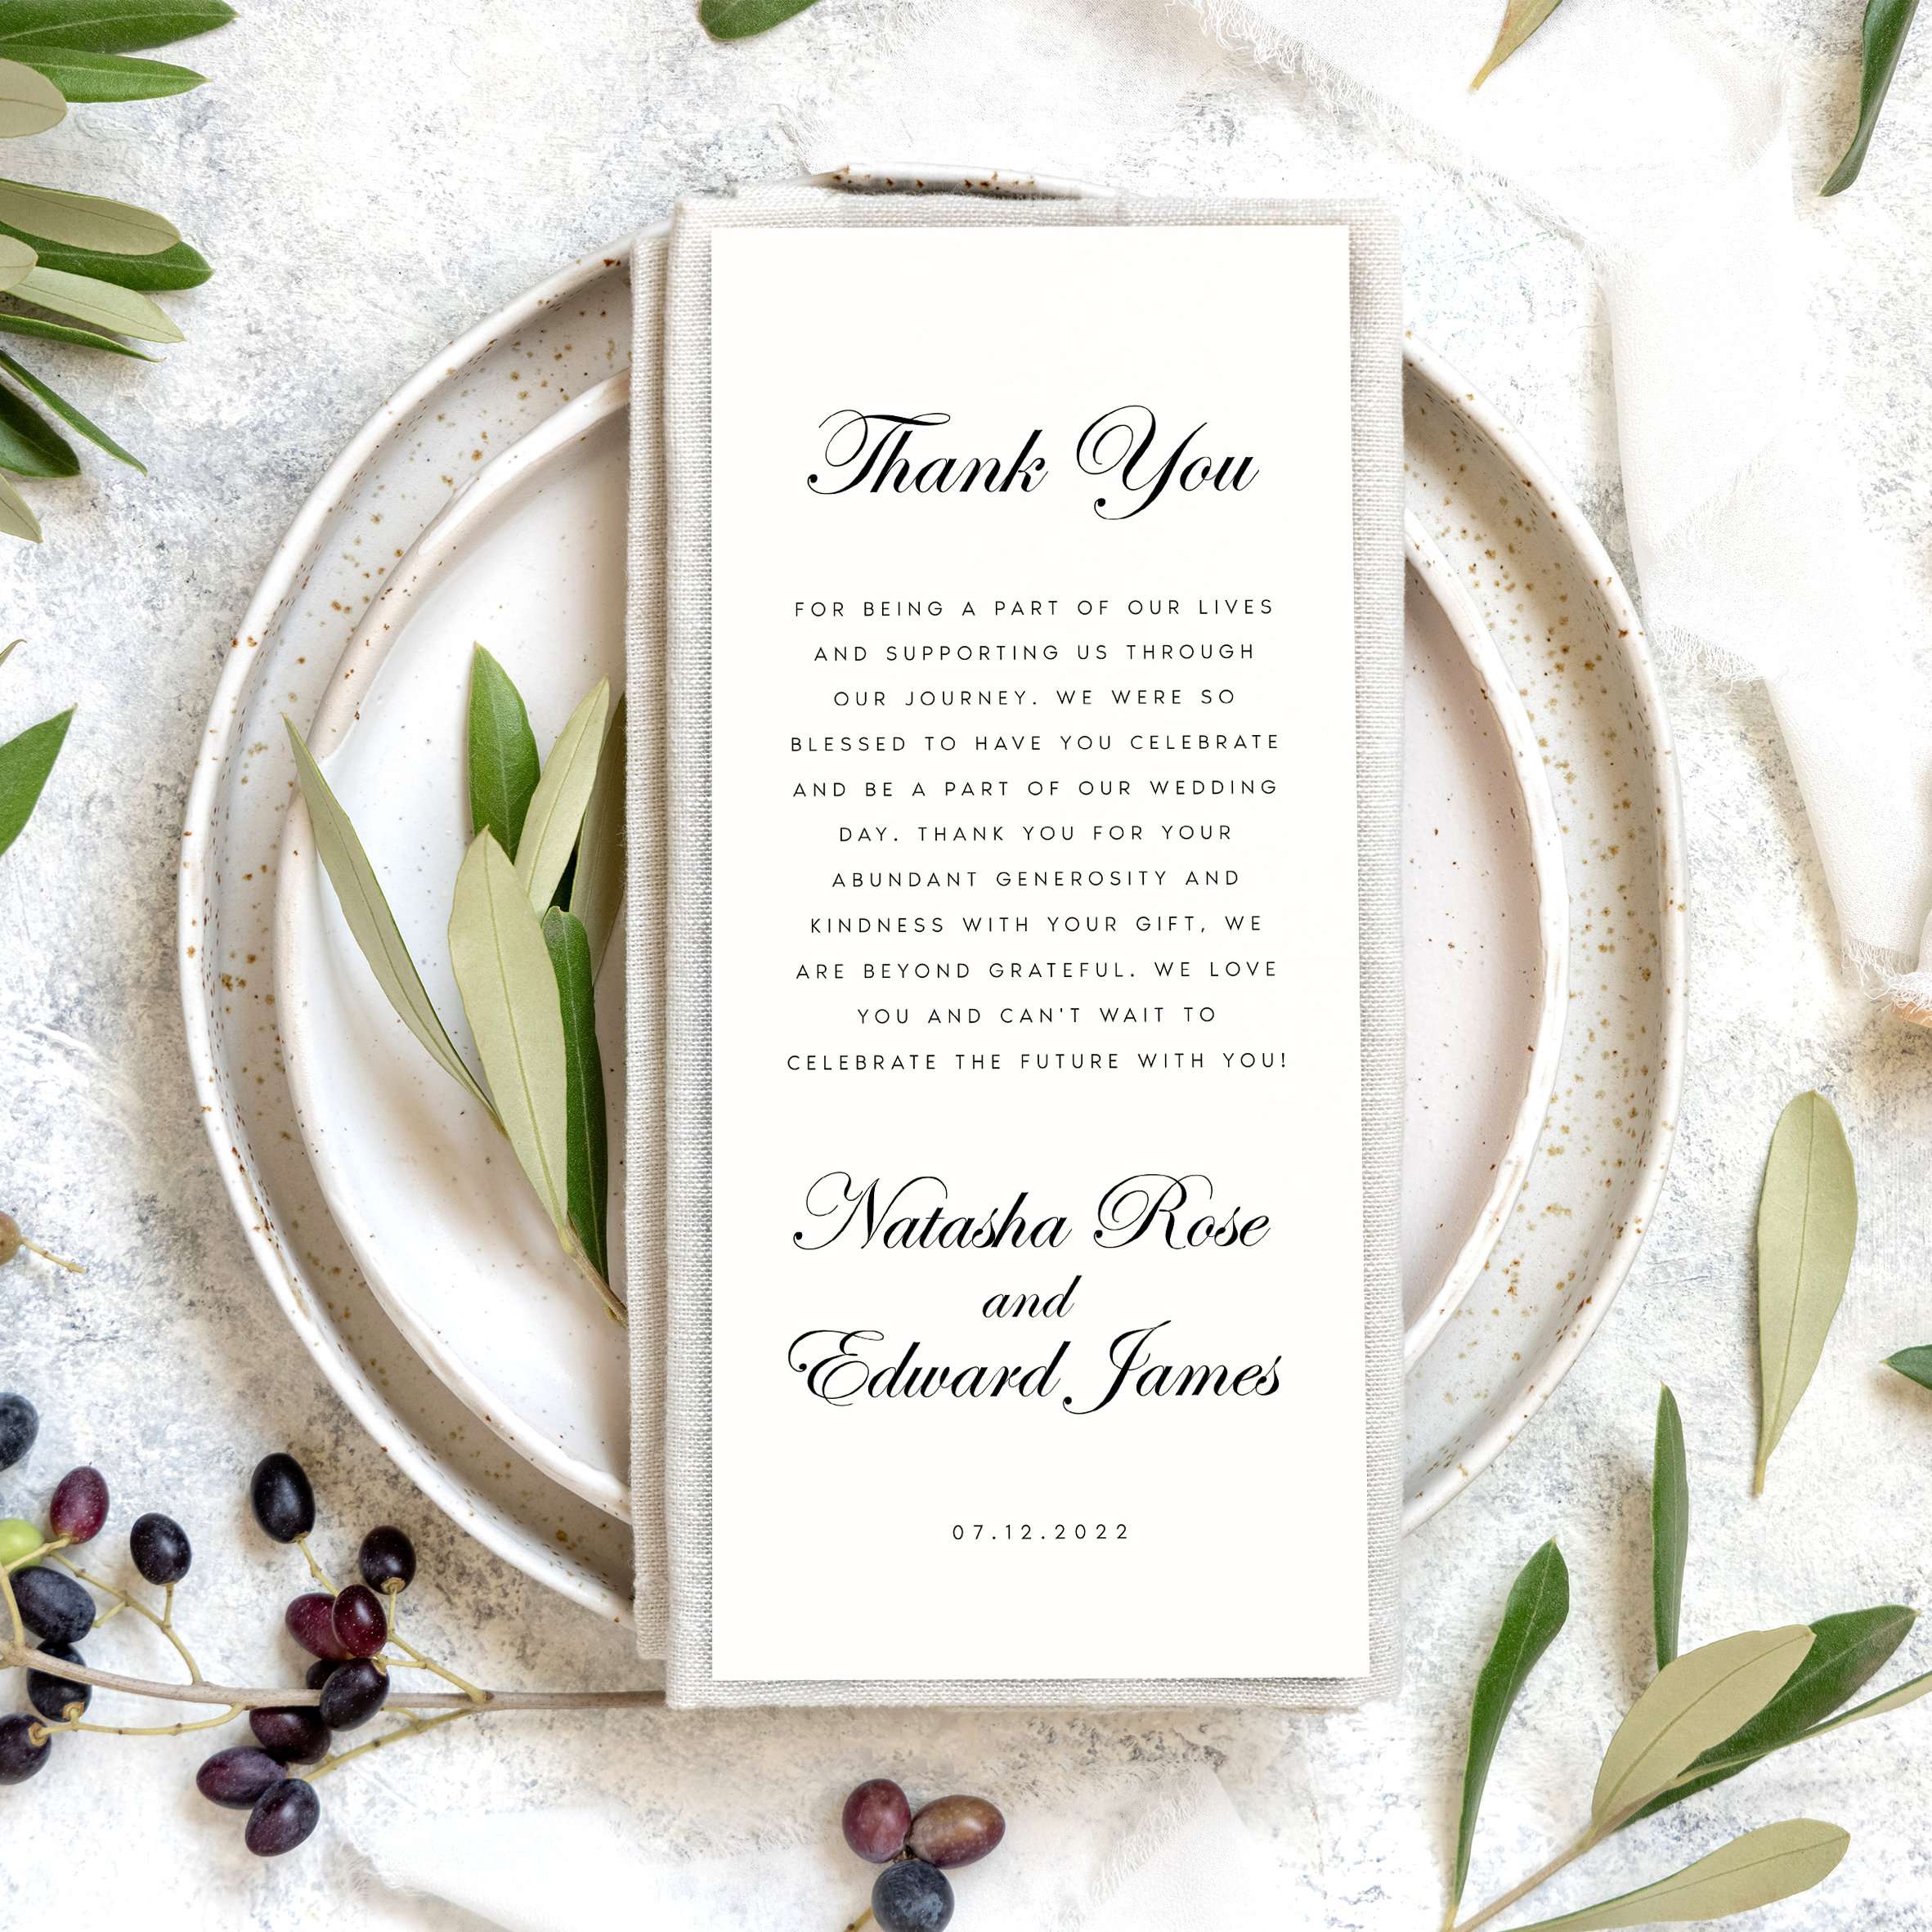 Whimsical Woodland Place Card Template